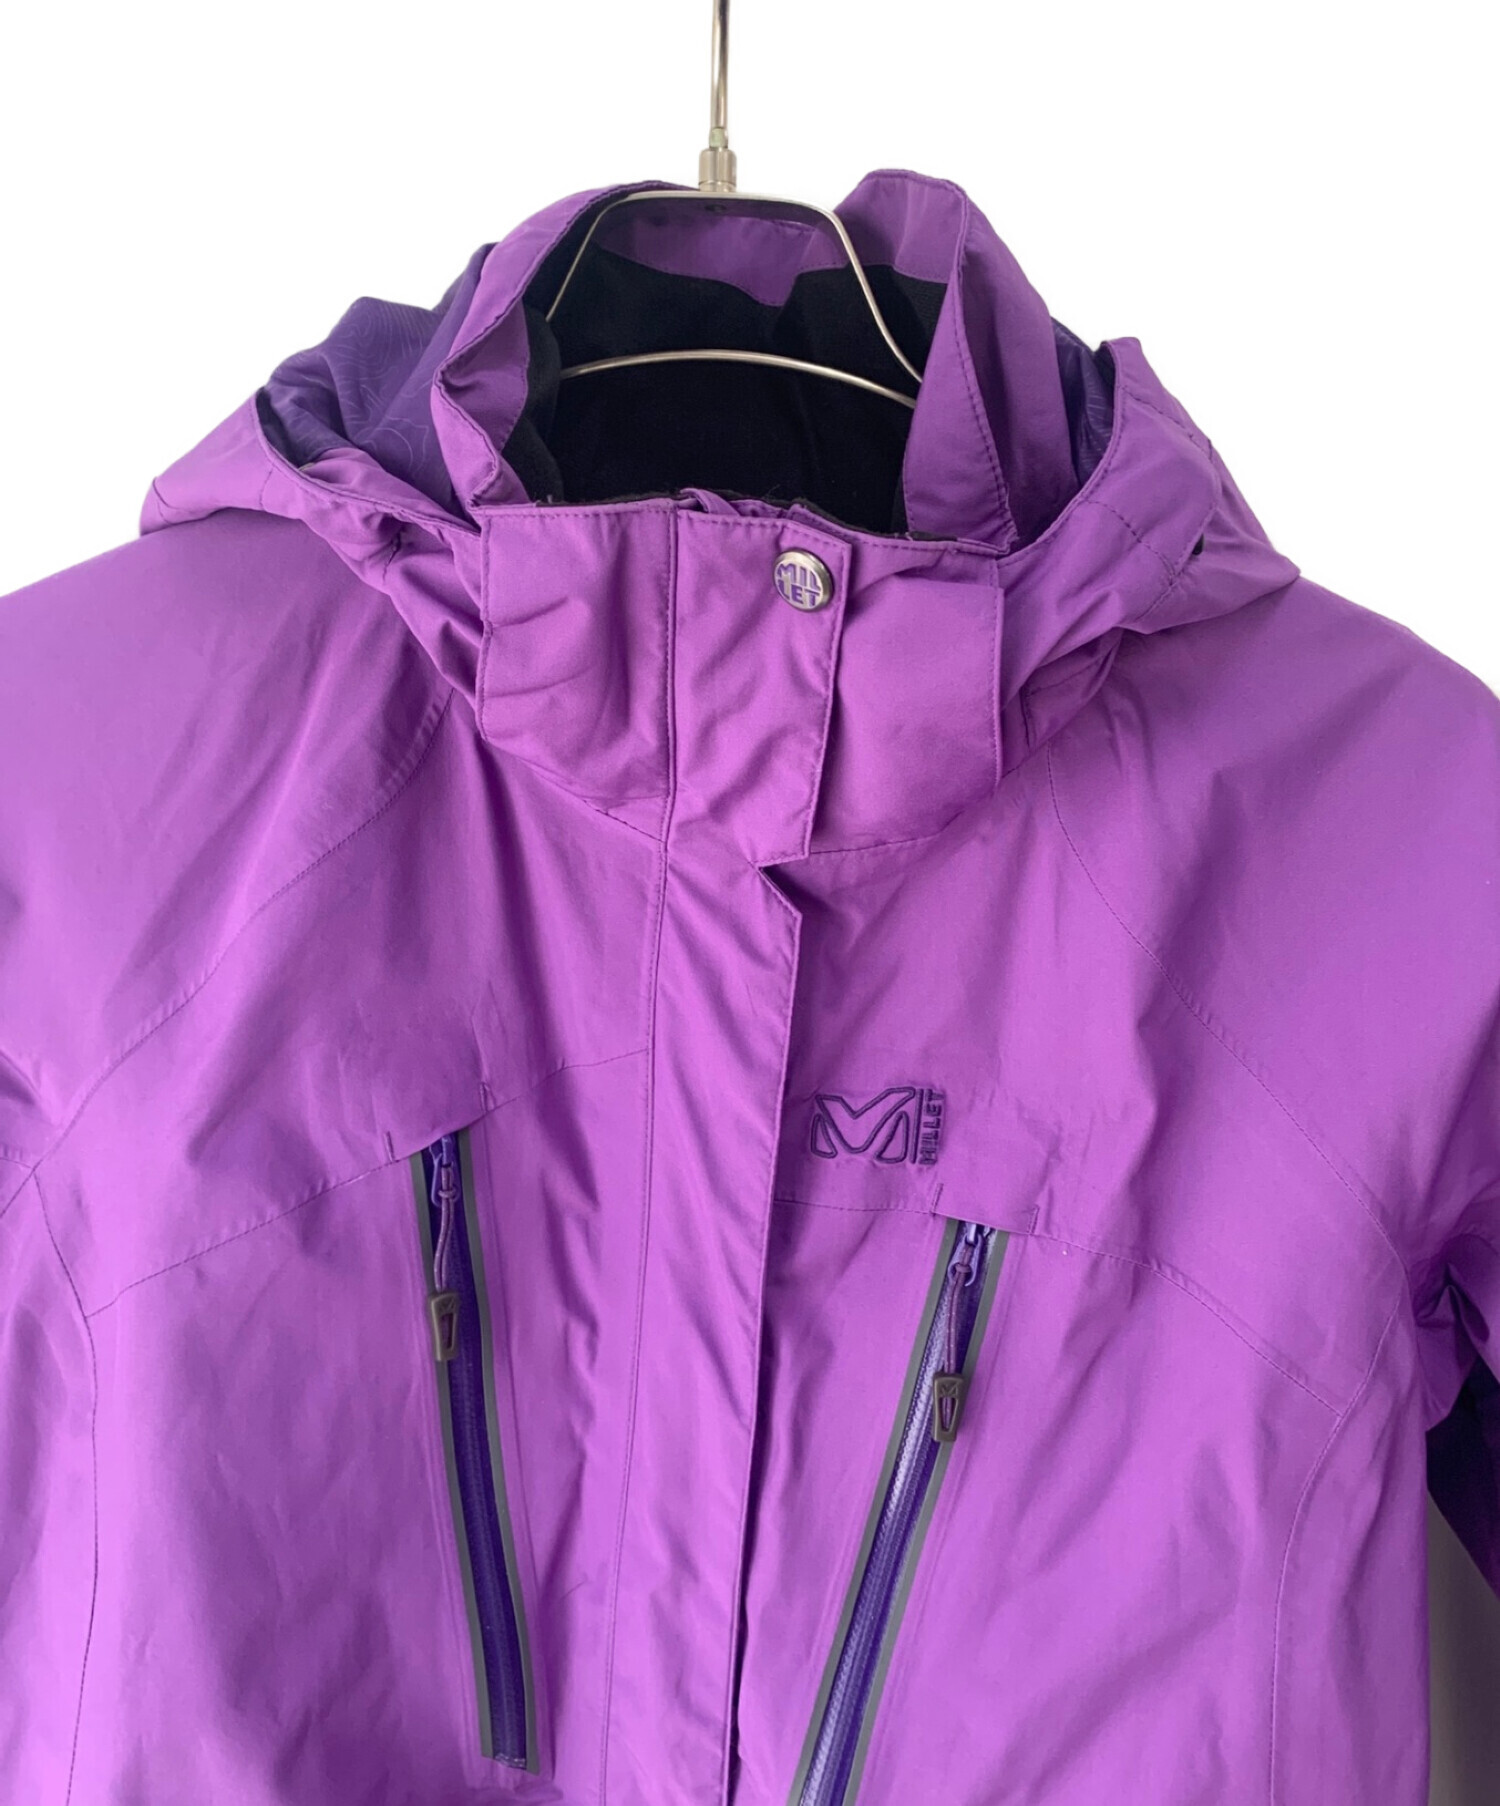 WOMENs S  ミレー LD クロス マウンテン 3in1 ジャケット LD Cross Mountain 3in1 Jacket プリマロフト DRY EDGE SHELL MILLET MIV7100 パープル系